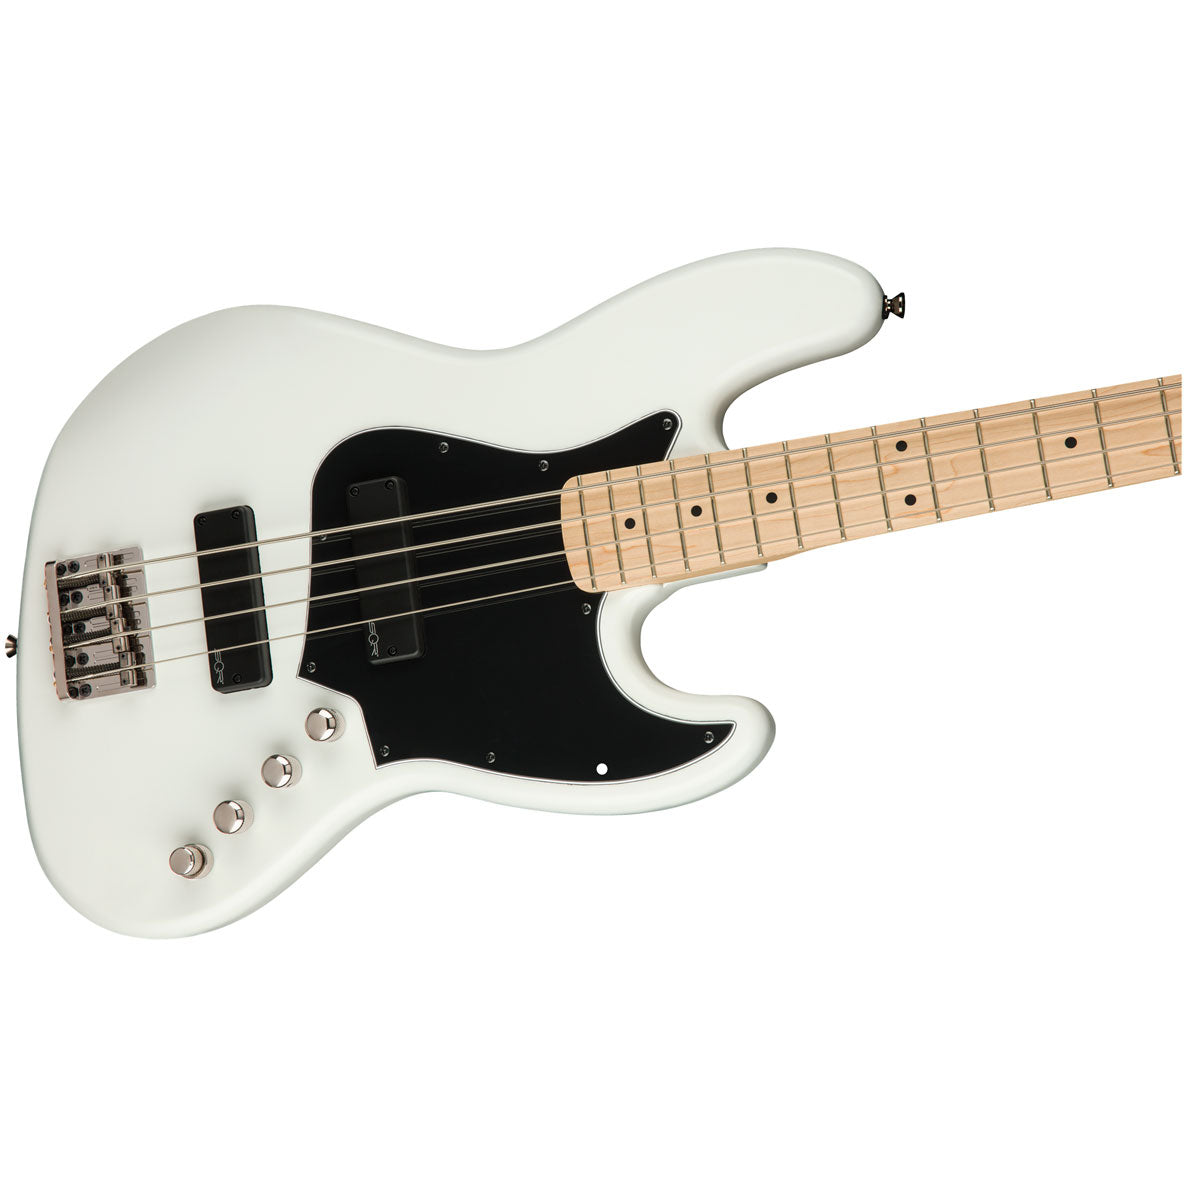 Bajo Electrico Fender Cont Act J Bass Hh Mn Flt Wht,0370450505